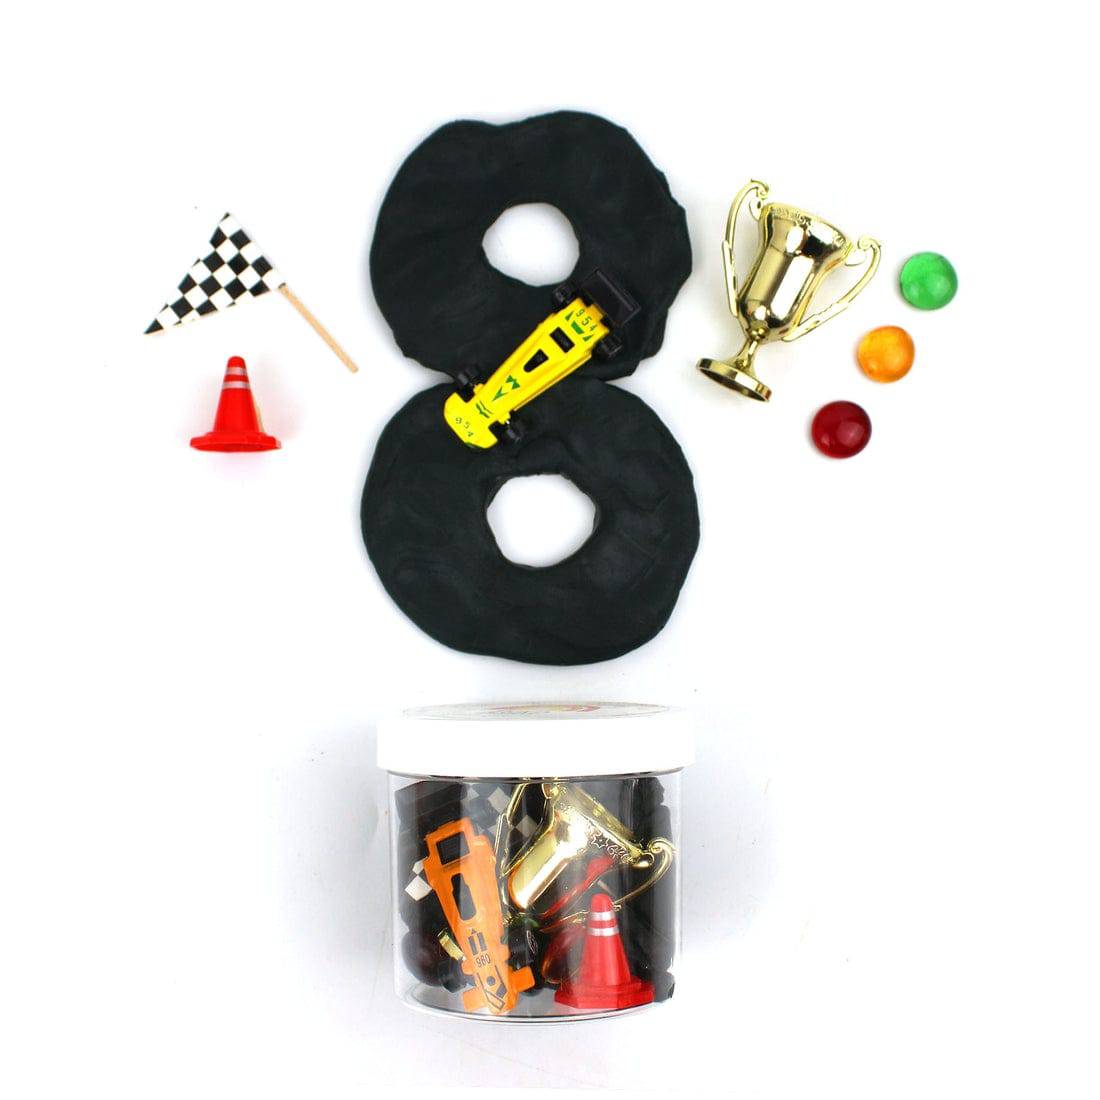 Race Car Track Play Dough-To-Go Kit - Twinkle Twinkle Little One